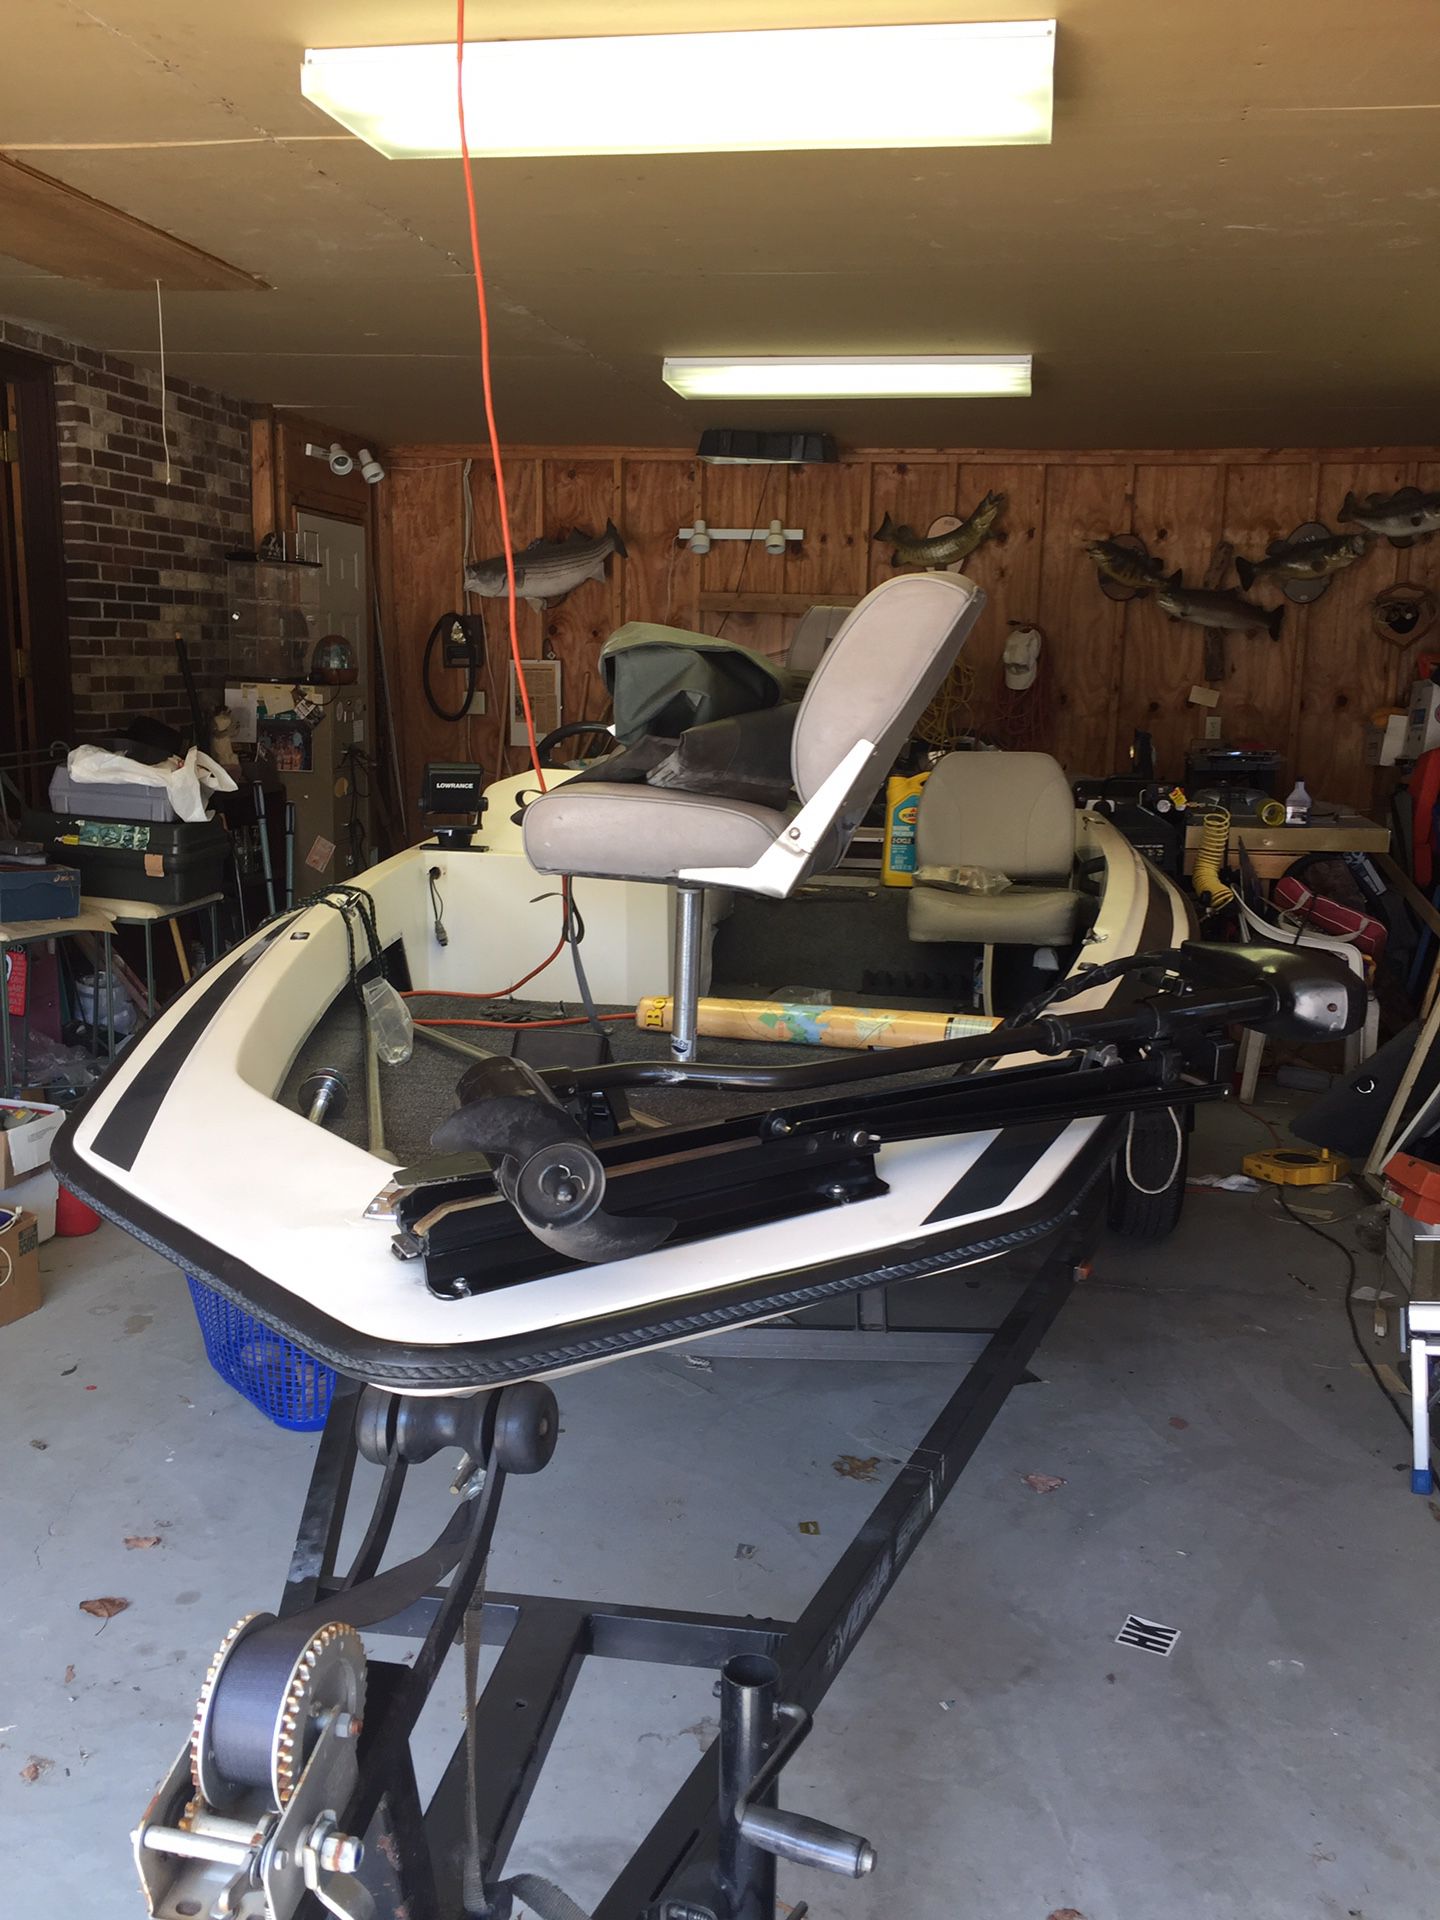 Hydrasport bass boat for sale or trade for pontoon boat of equal value